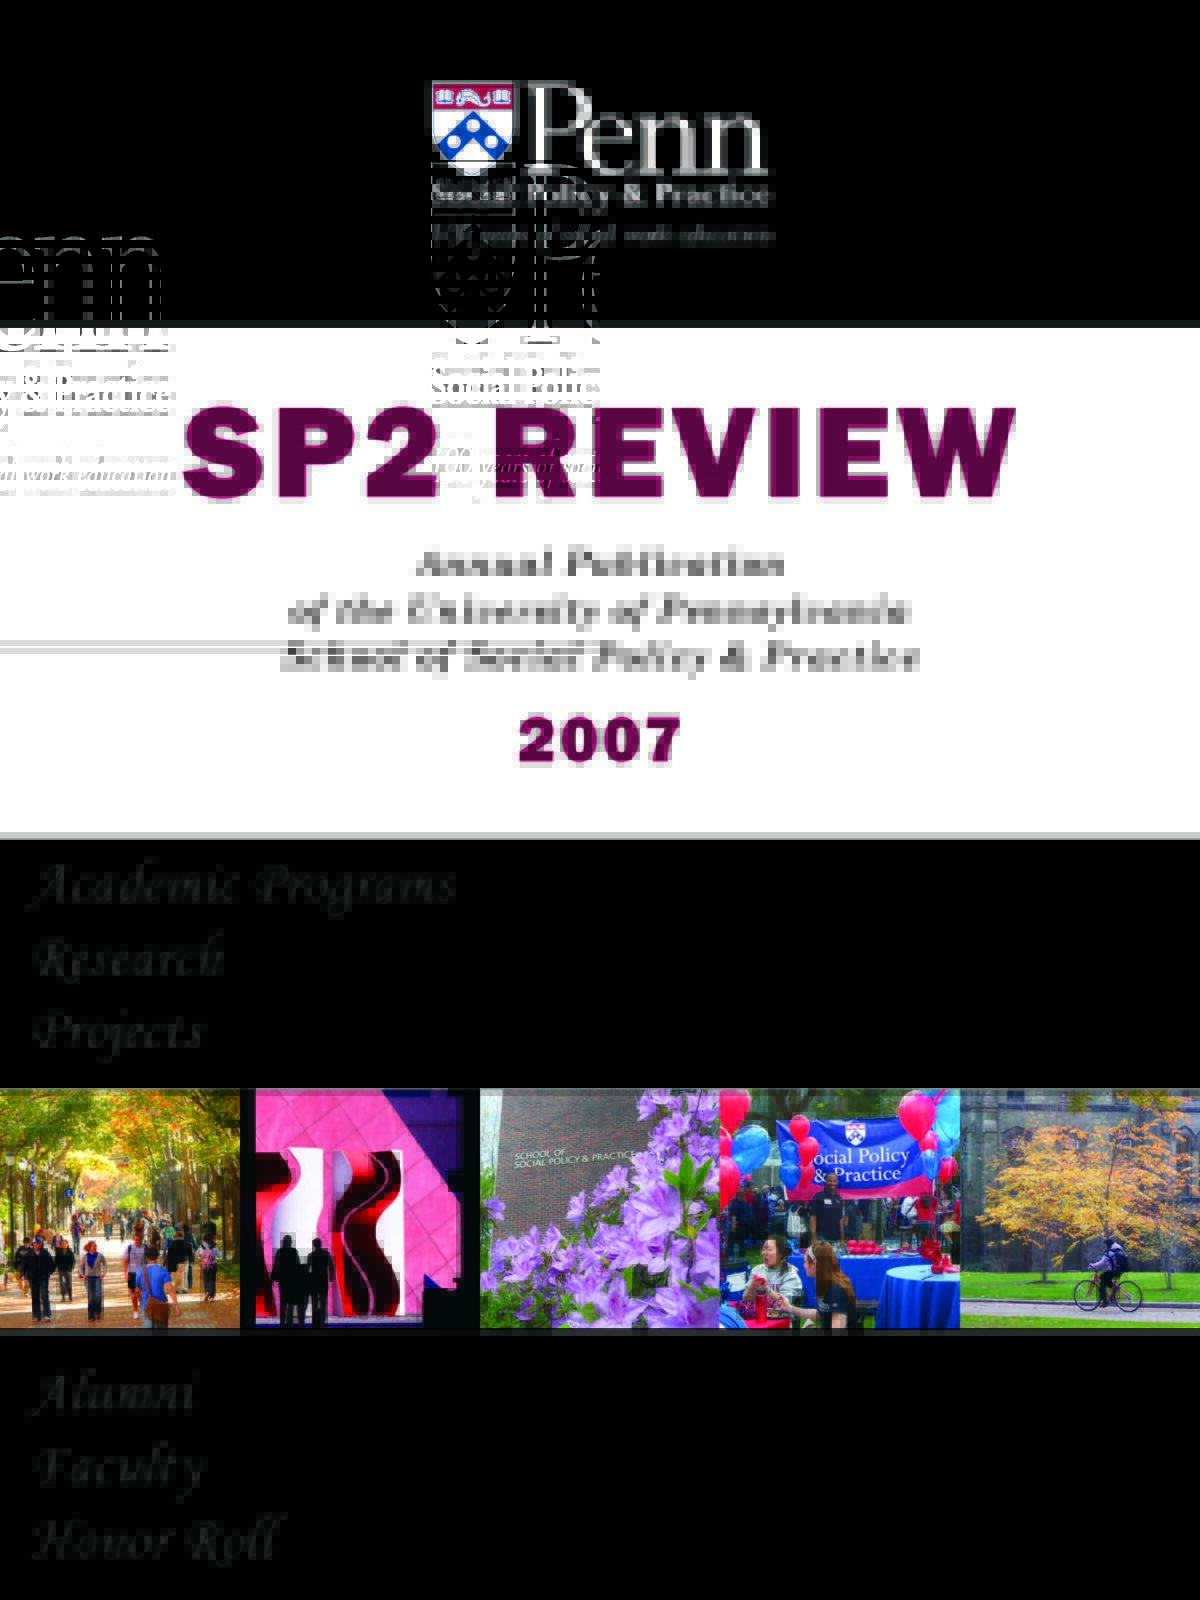 Cover of the SP2 Review